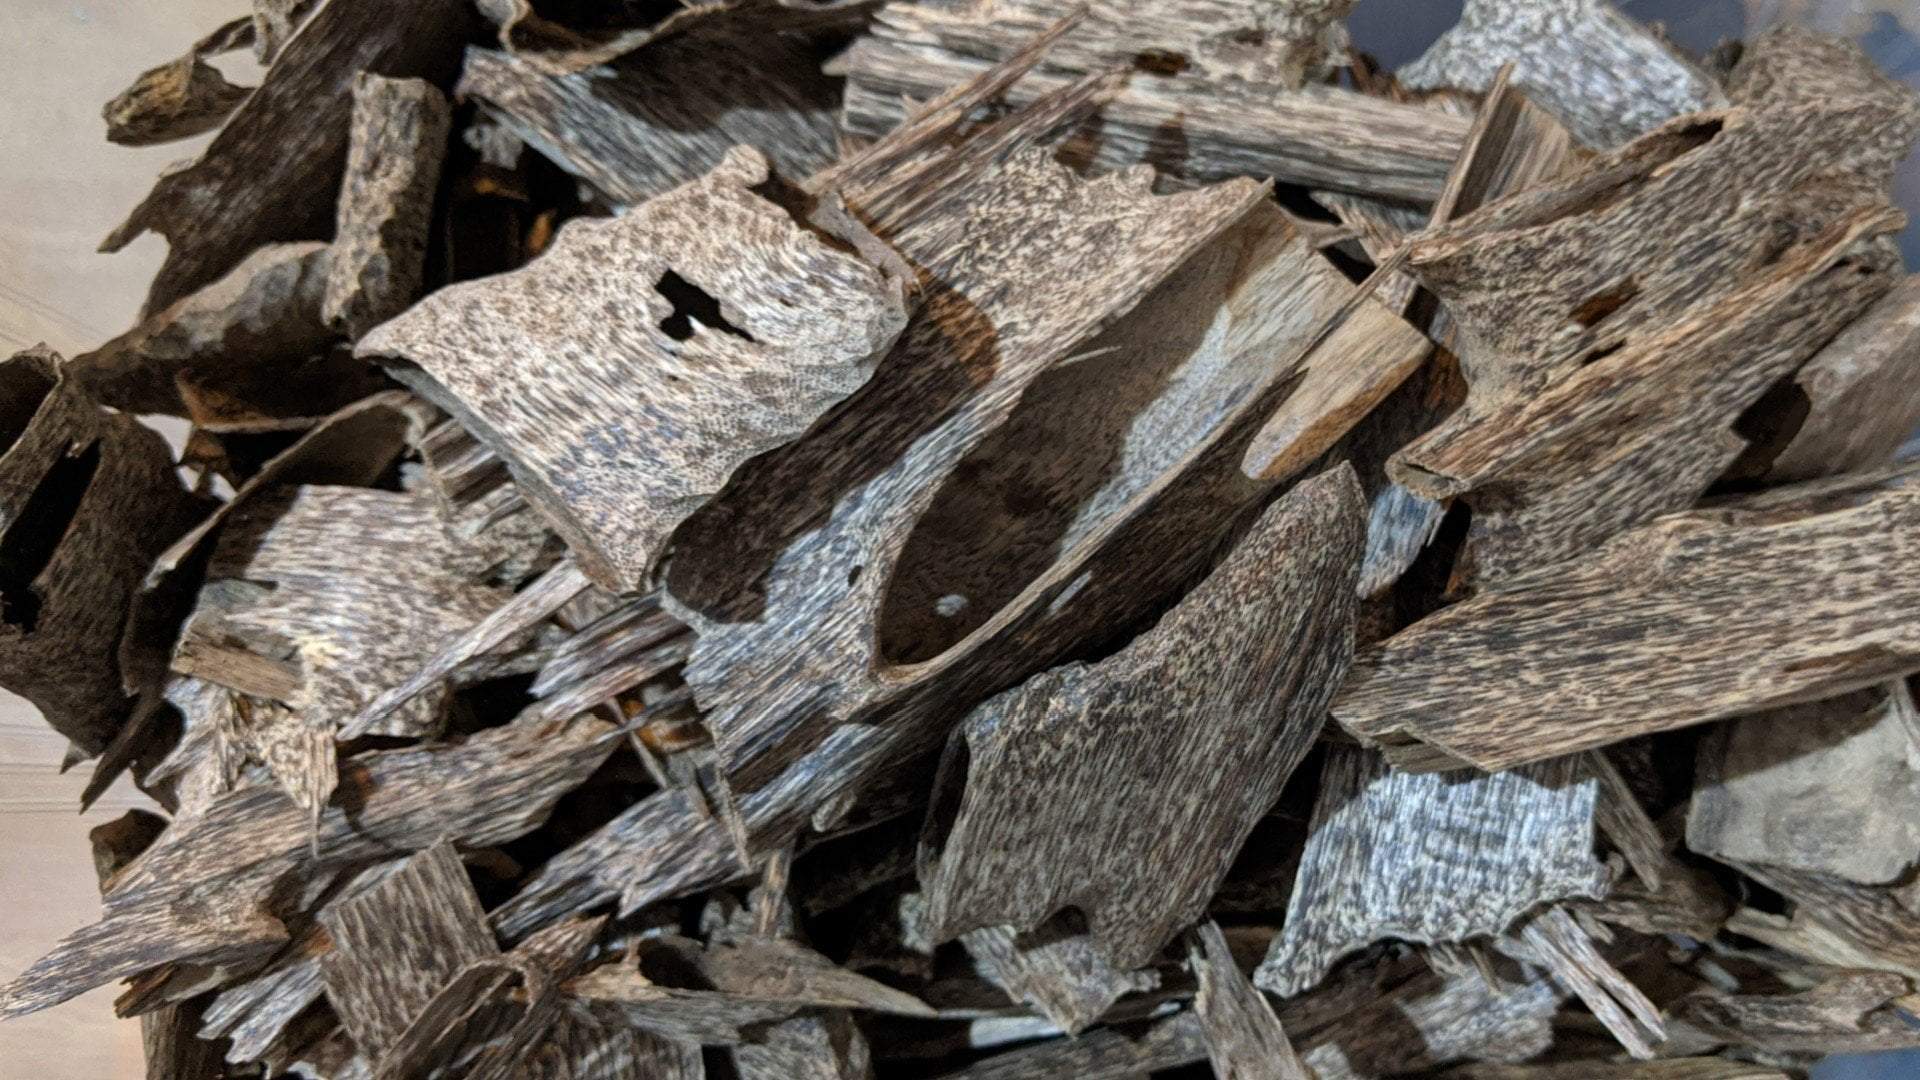 Agarwood chips are resin fragments derived from the Aquilaria tree. Aquilaria trees release resin in reaction to damage, and this resin is what gives Agarwood its characteristic aroma.